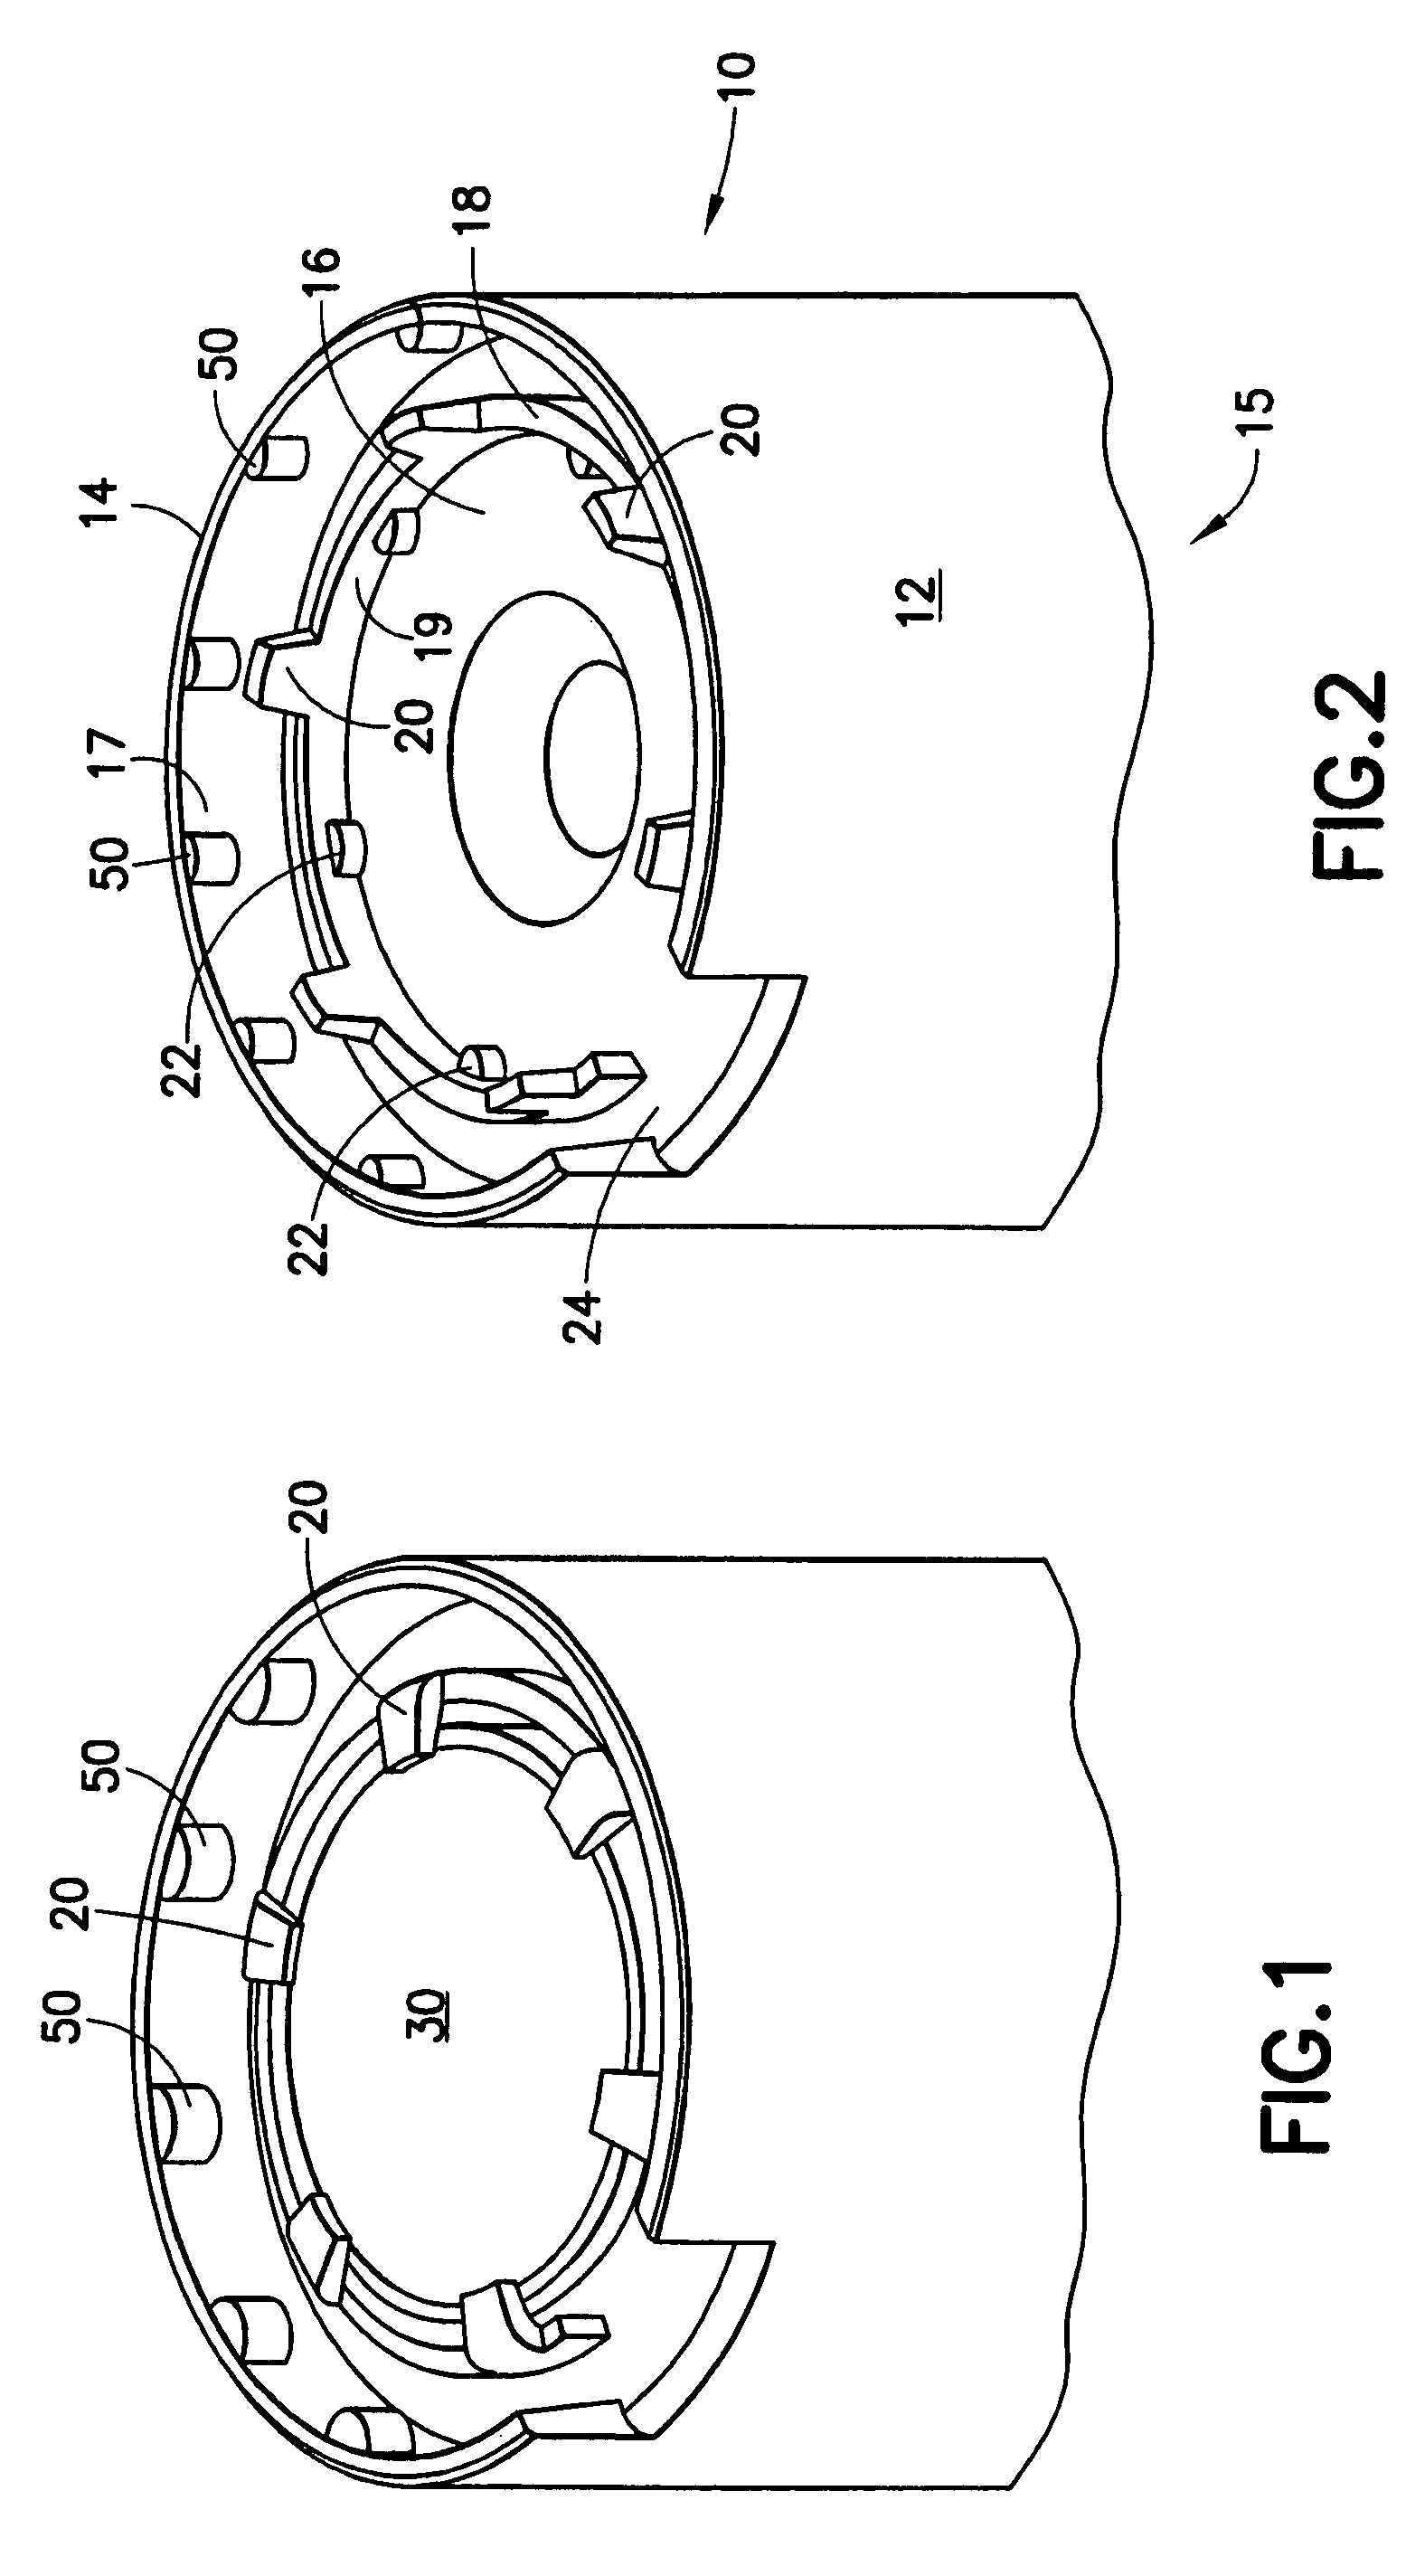 System, method, and apparatuses for maintaining, tracking, transporting and identifying the integrity of a disposable specimen container with a re-usable transponder